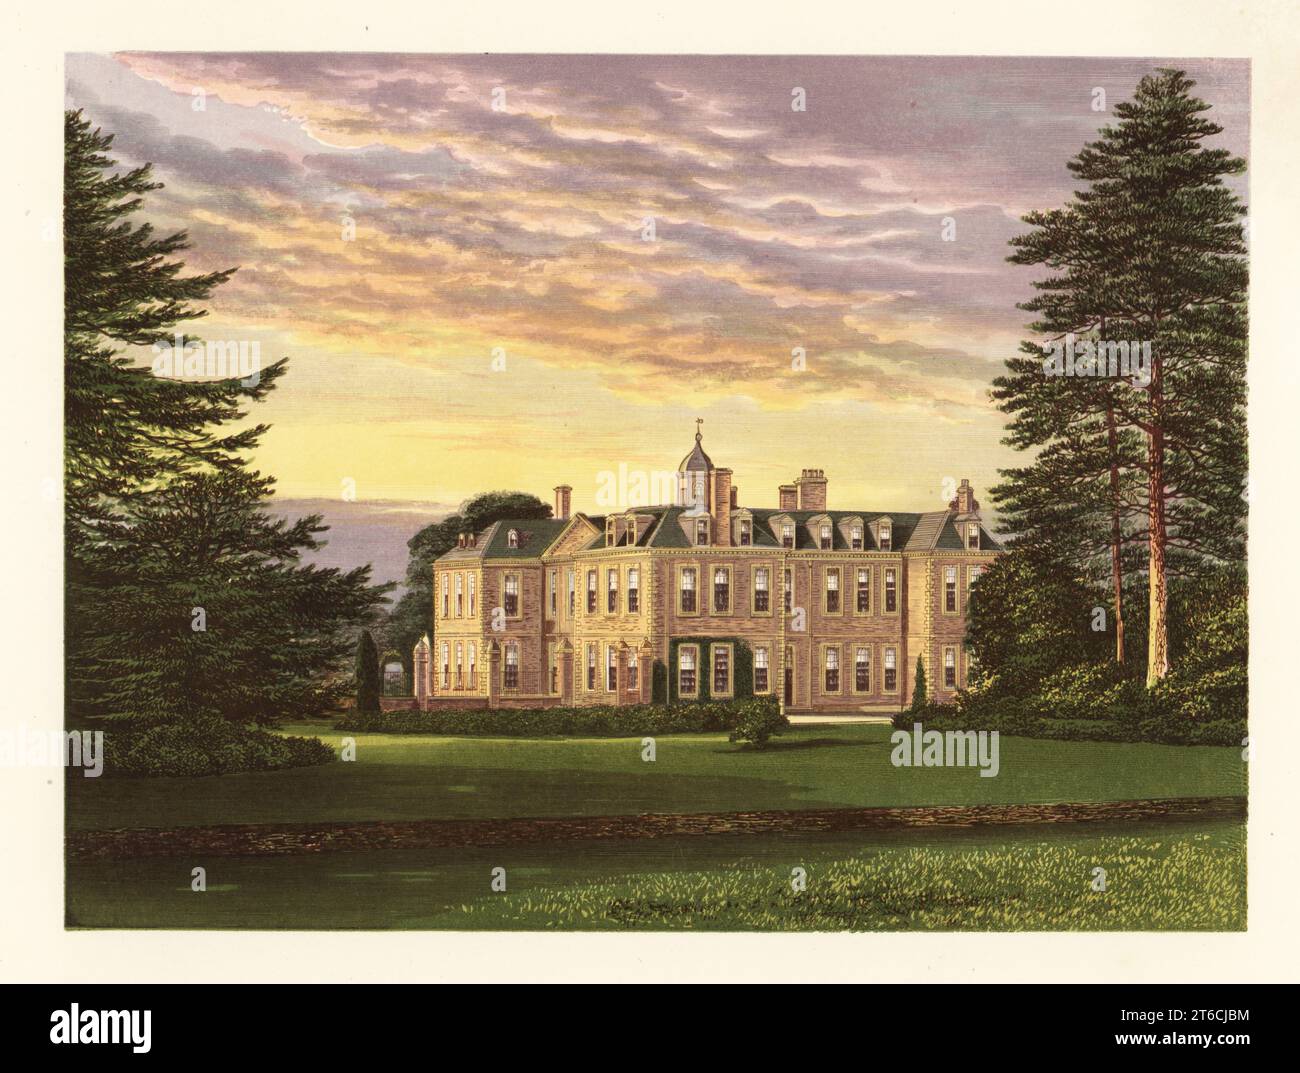 Hanbury Hall, Worcestershire, England. 18th century red-brick house in the Queen Anne Style. Home of Harry Foley Vernon, 1st Baronet of Hanbury Hall. Colour woodblock by Benjamin Fawcett in the Baxter process of an illustration by Alexander Francis Lydon from Reverend Francis Orpen Morriss A Series of Picturesque Views of the Seats of Noblemen and Gentlemen of Great Britain and Ireland, William Mackenzie, London, 1880. Stock Photo